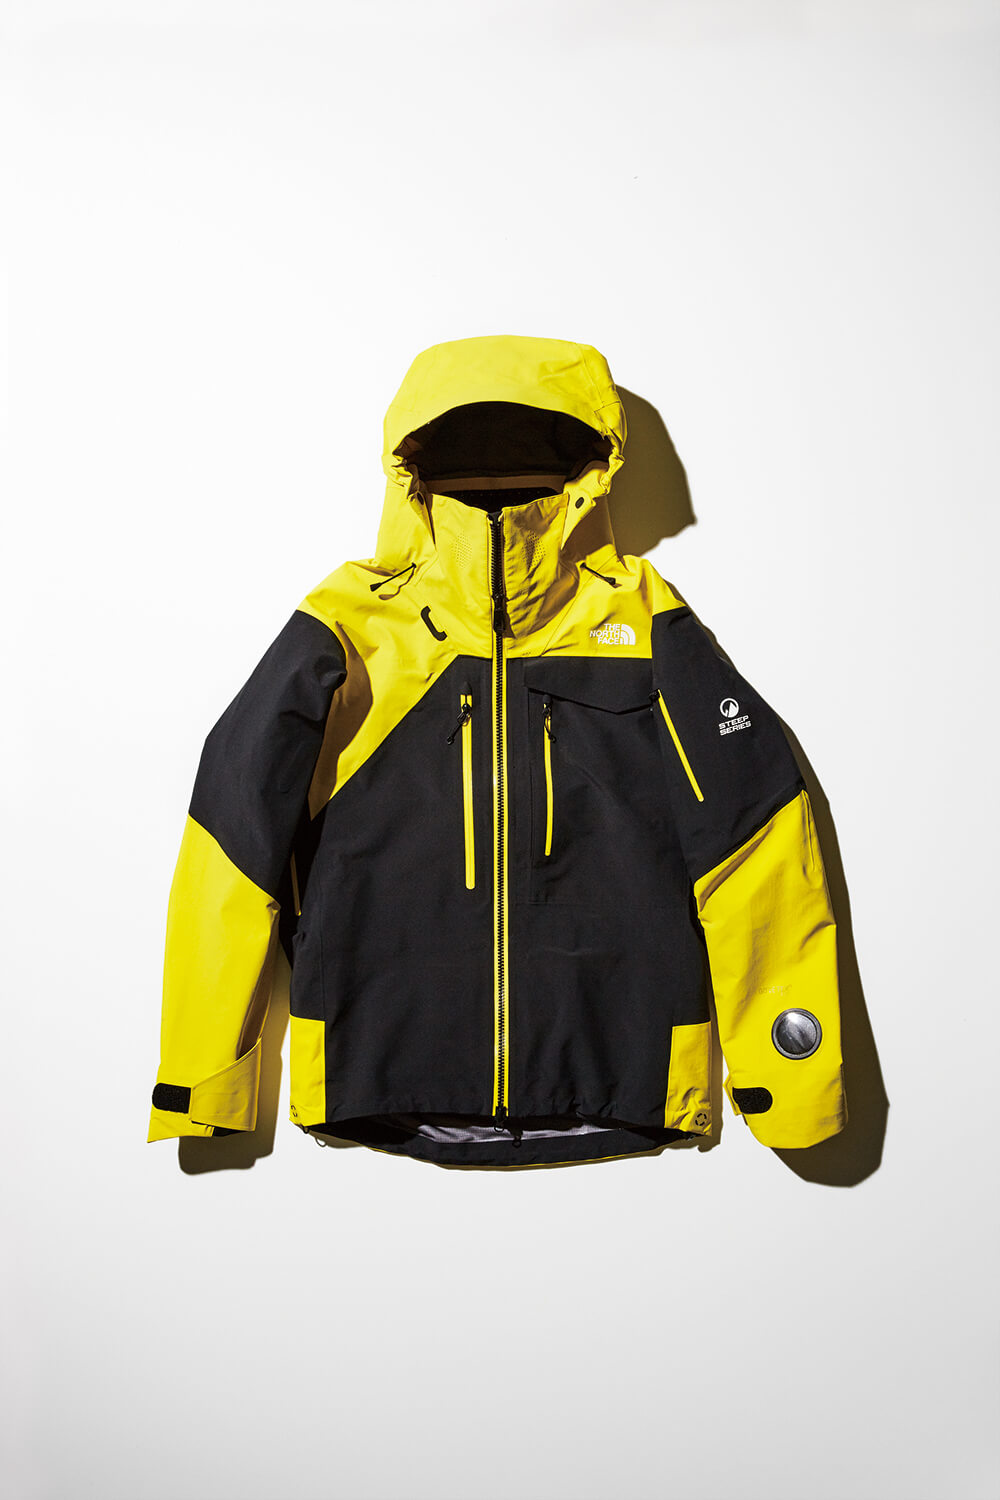 THE NORTH FACE WINTER GEAR CATALOG 2018-2019 | THE NORTH FACE ...